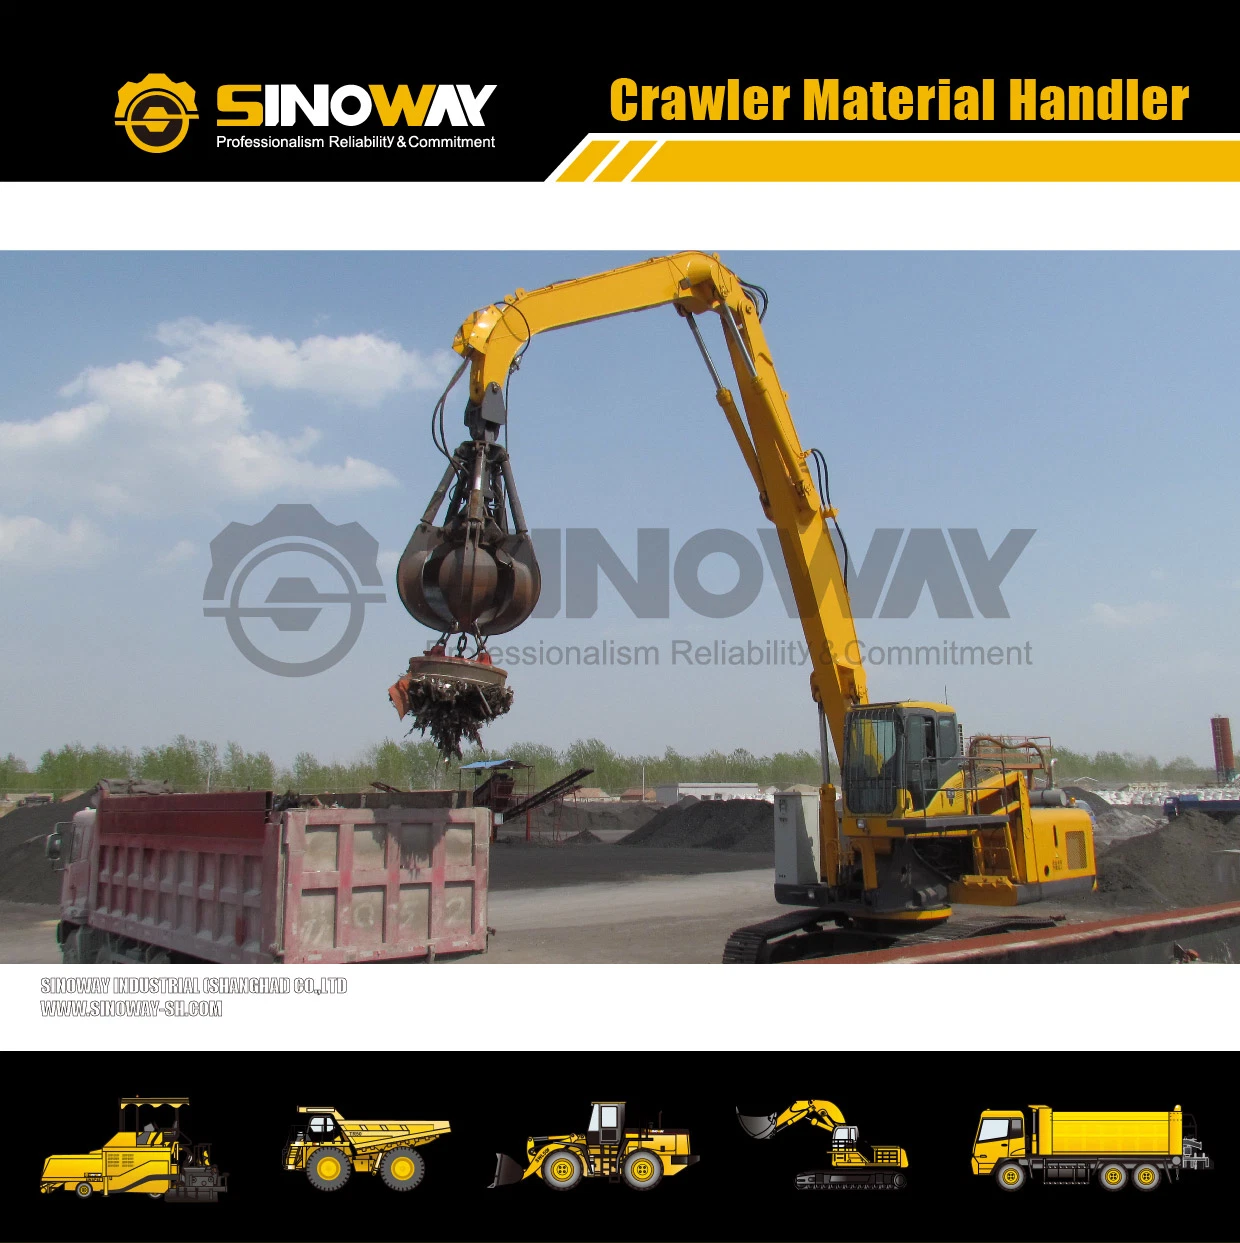 High Performance 42ton Hydraulic Crawler Material Handling Equipment for Steel Plant